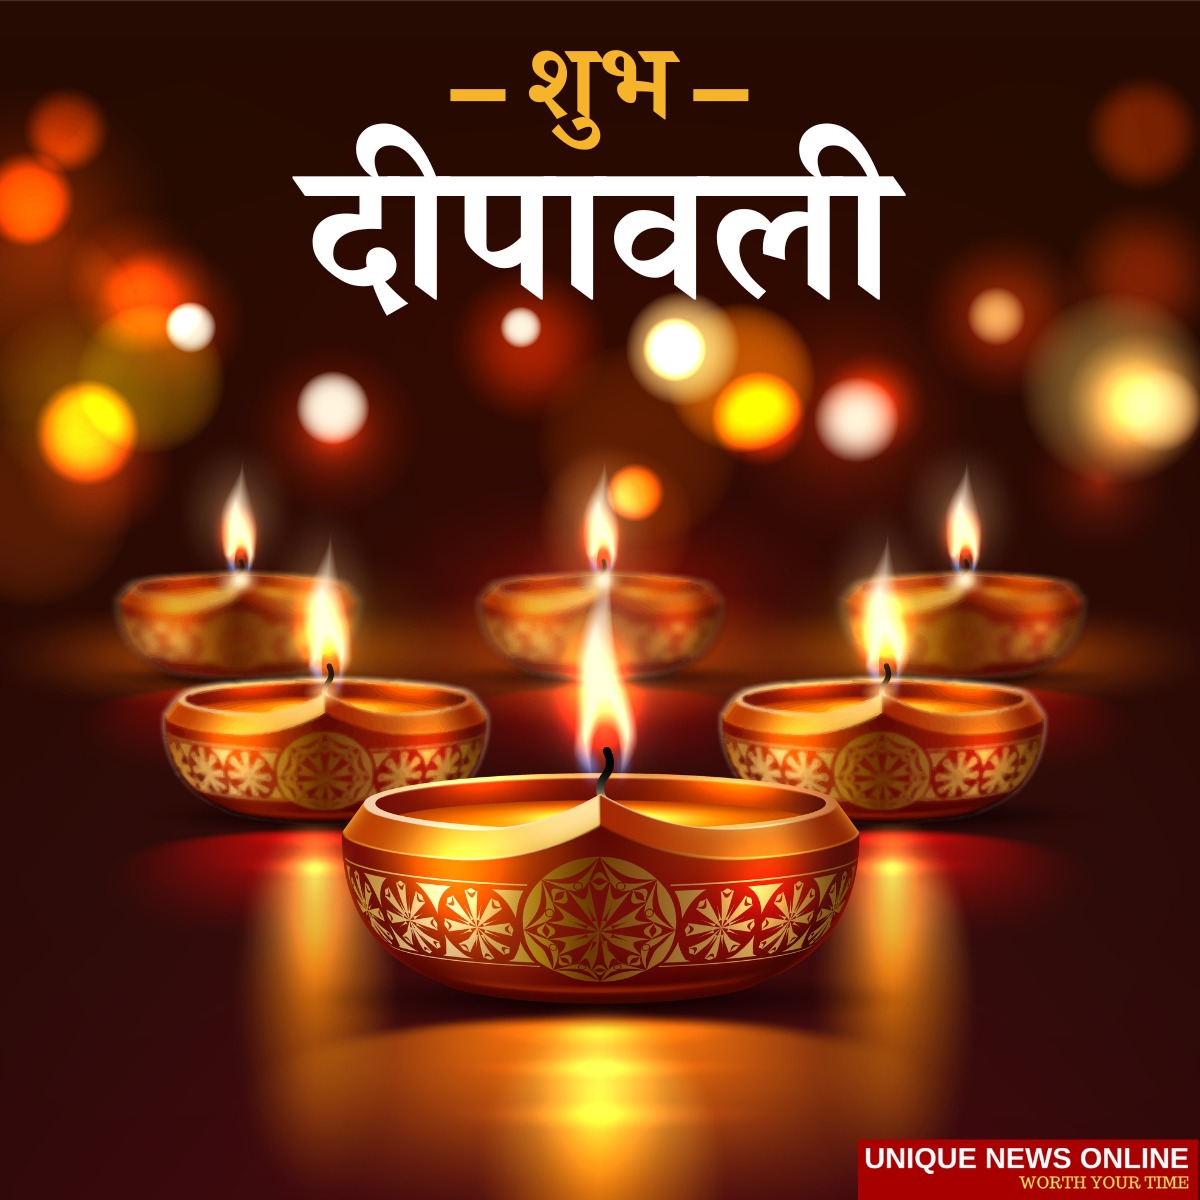 Shubh Diwali 2022: Best Marathi Quotes, Greetings, Wishes, HD Images, Messages, Shayari, and Banners to greet your Employees or Colleagues